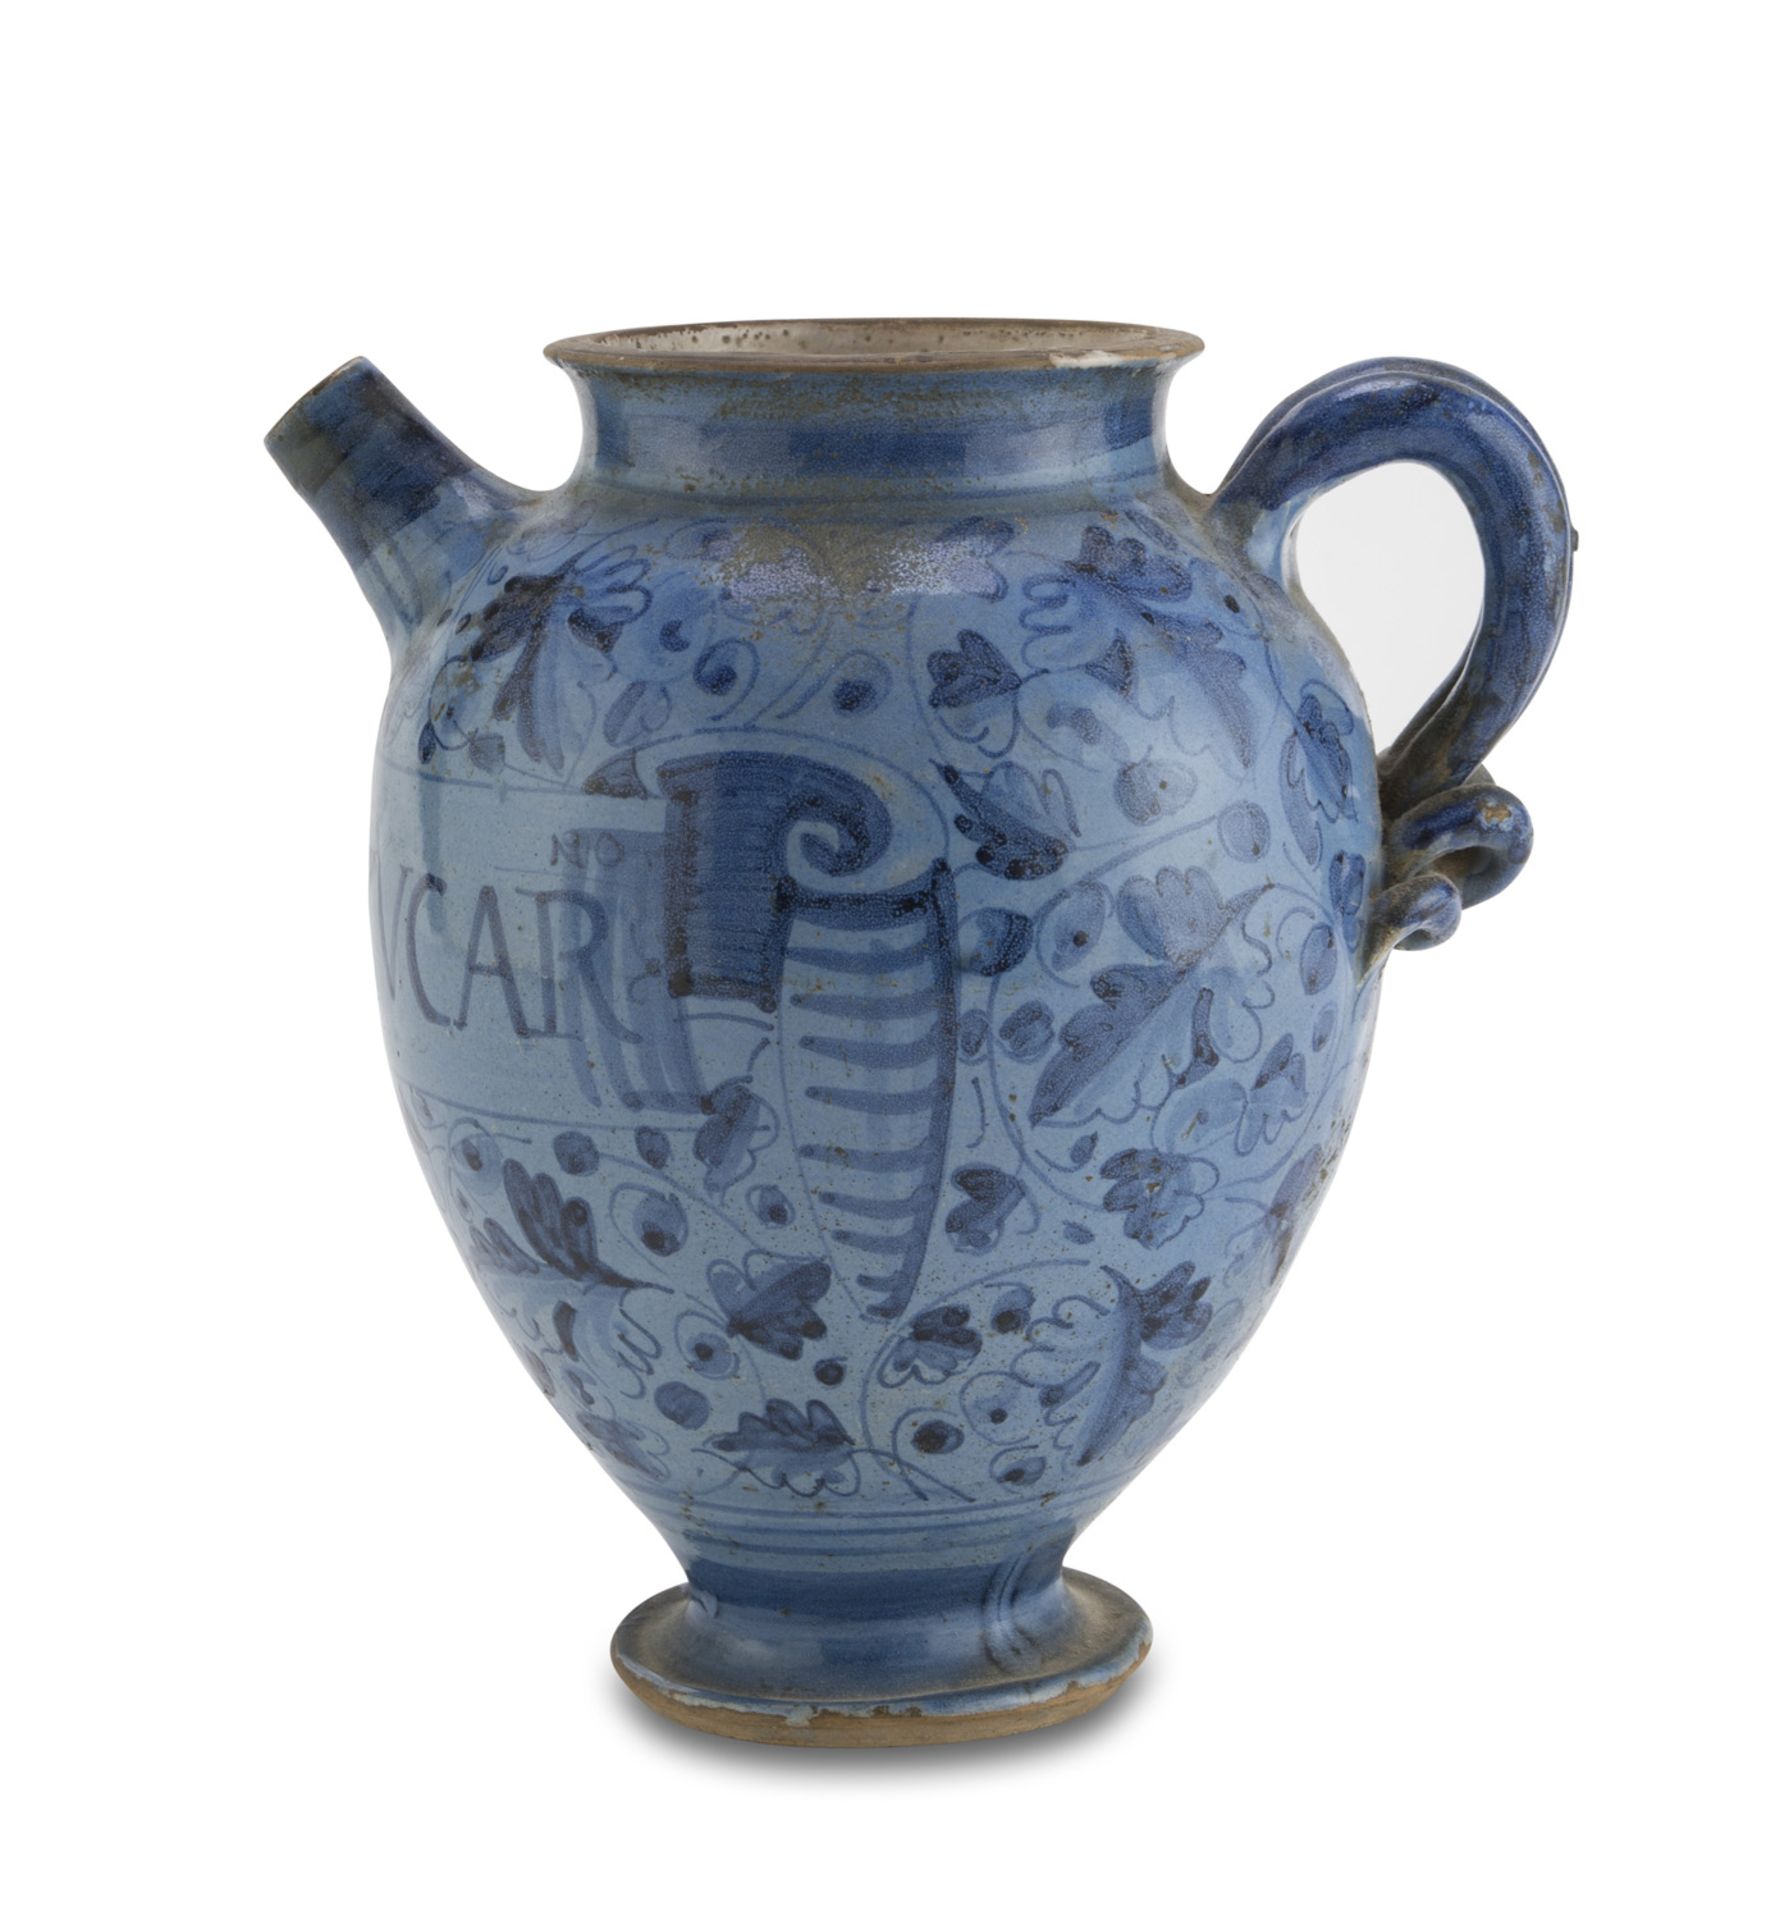 PHARMACY JUG IN MAIOLICA, ROME 18TH CENTURY in blue enamel, decorated with racemes and leaves and